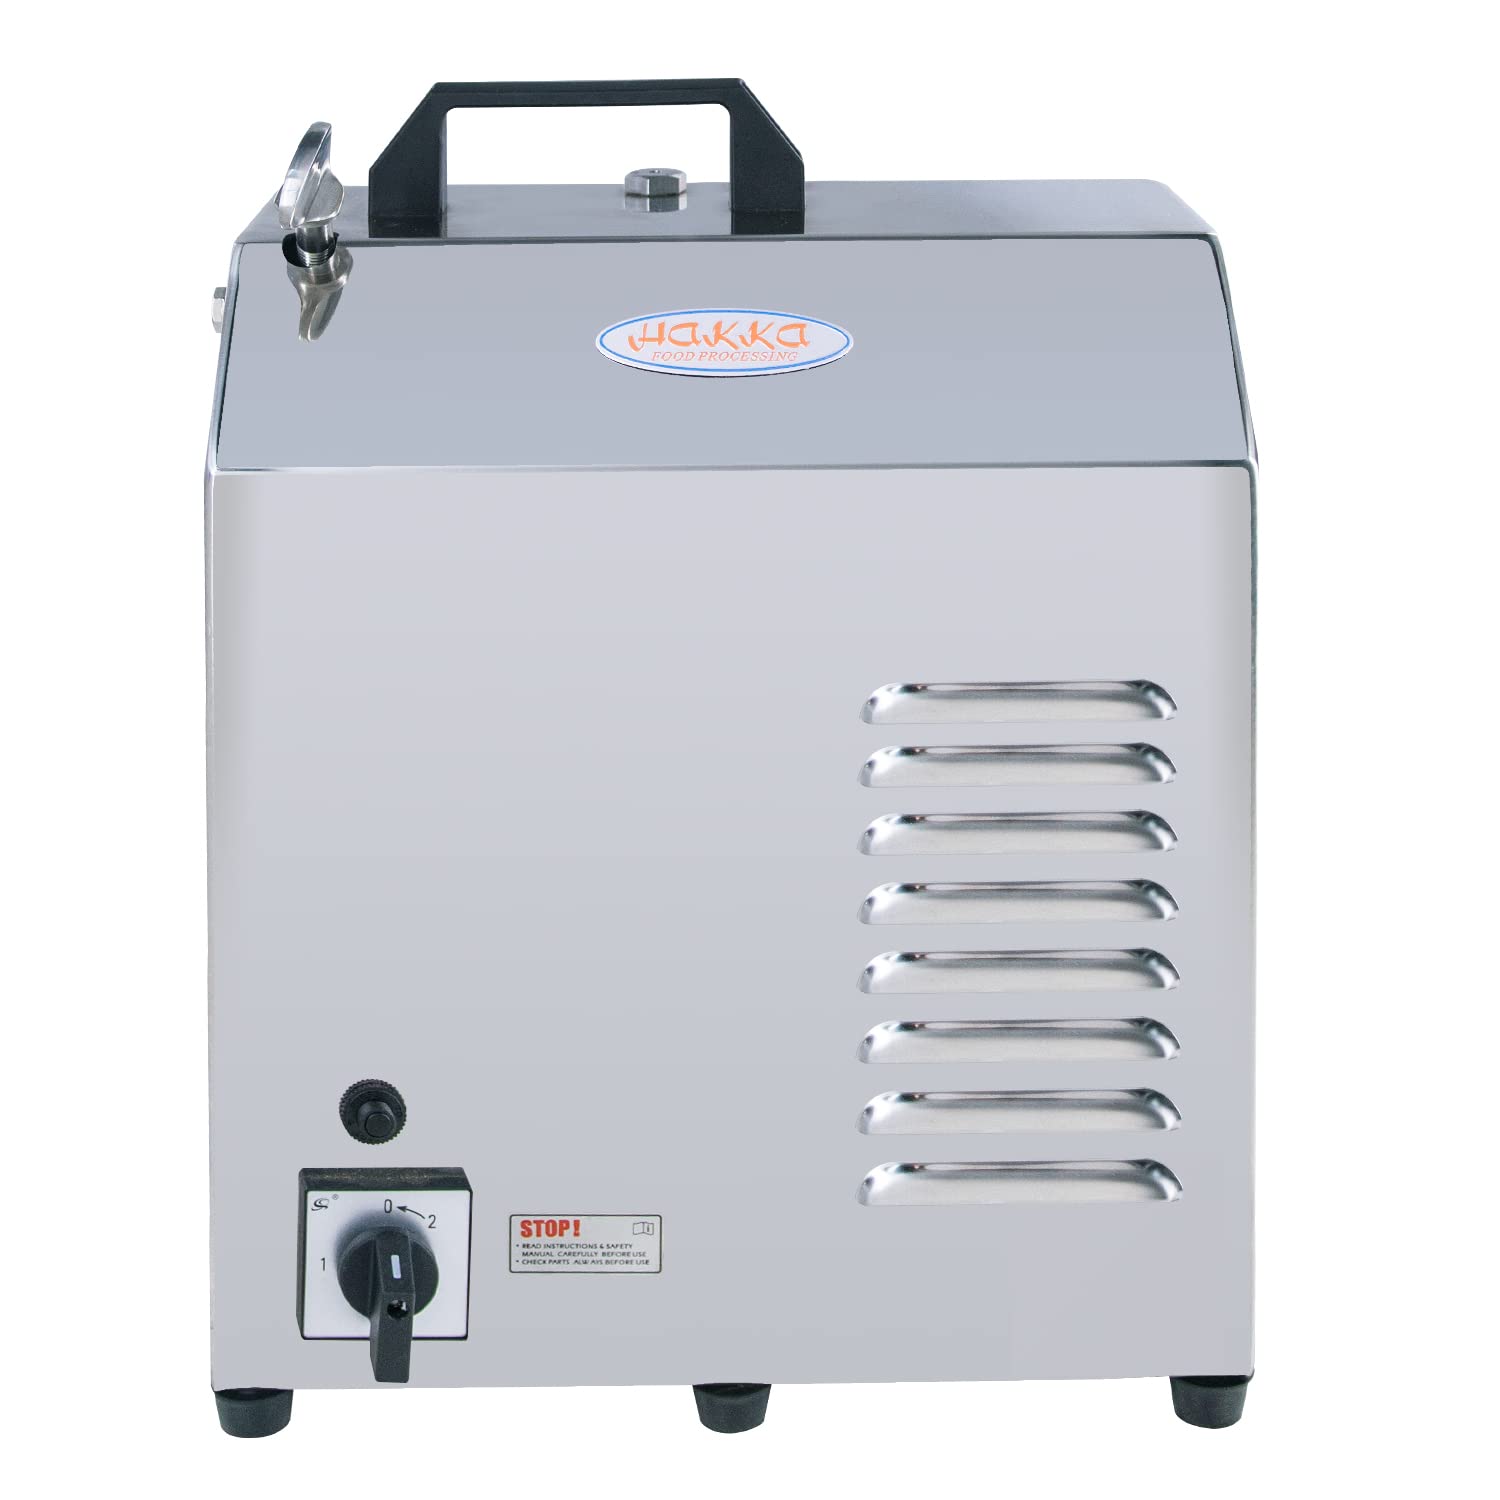 Meat mixer, Meat kneader - All industrial manufacturers